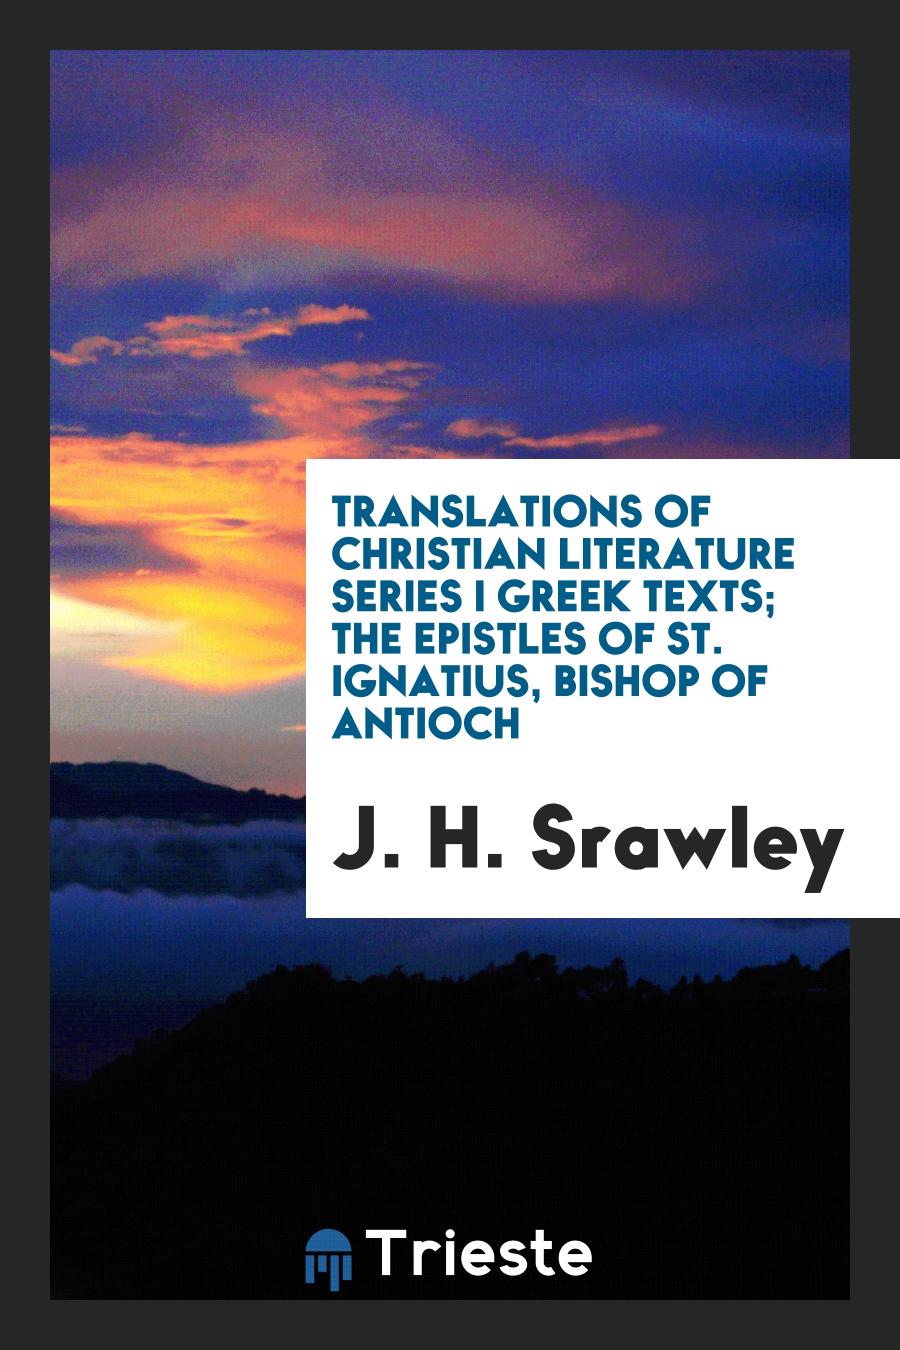 Translations of Christian Literature Series I Greek Texts; The Epistles of St. Ignatius, Bishop of Antioch